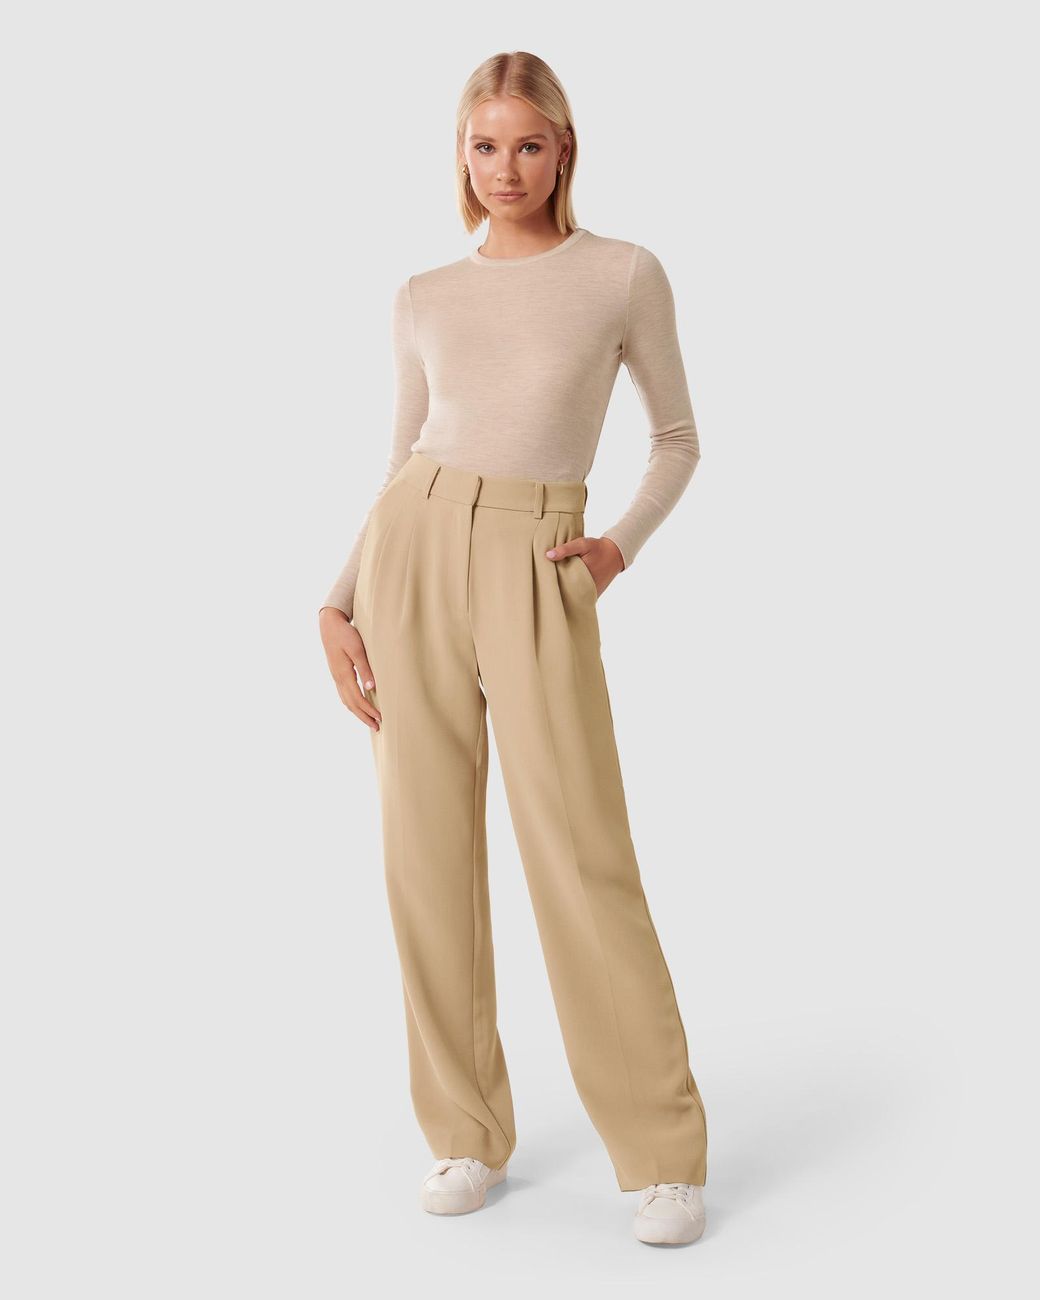 FOREVER 21 Colorblock Women White Track Pants - Buy FOREVER 21 Colorblock  Women White Track Pants Online at Best Prices in India | Flipkart.com